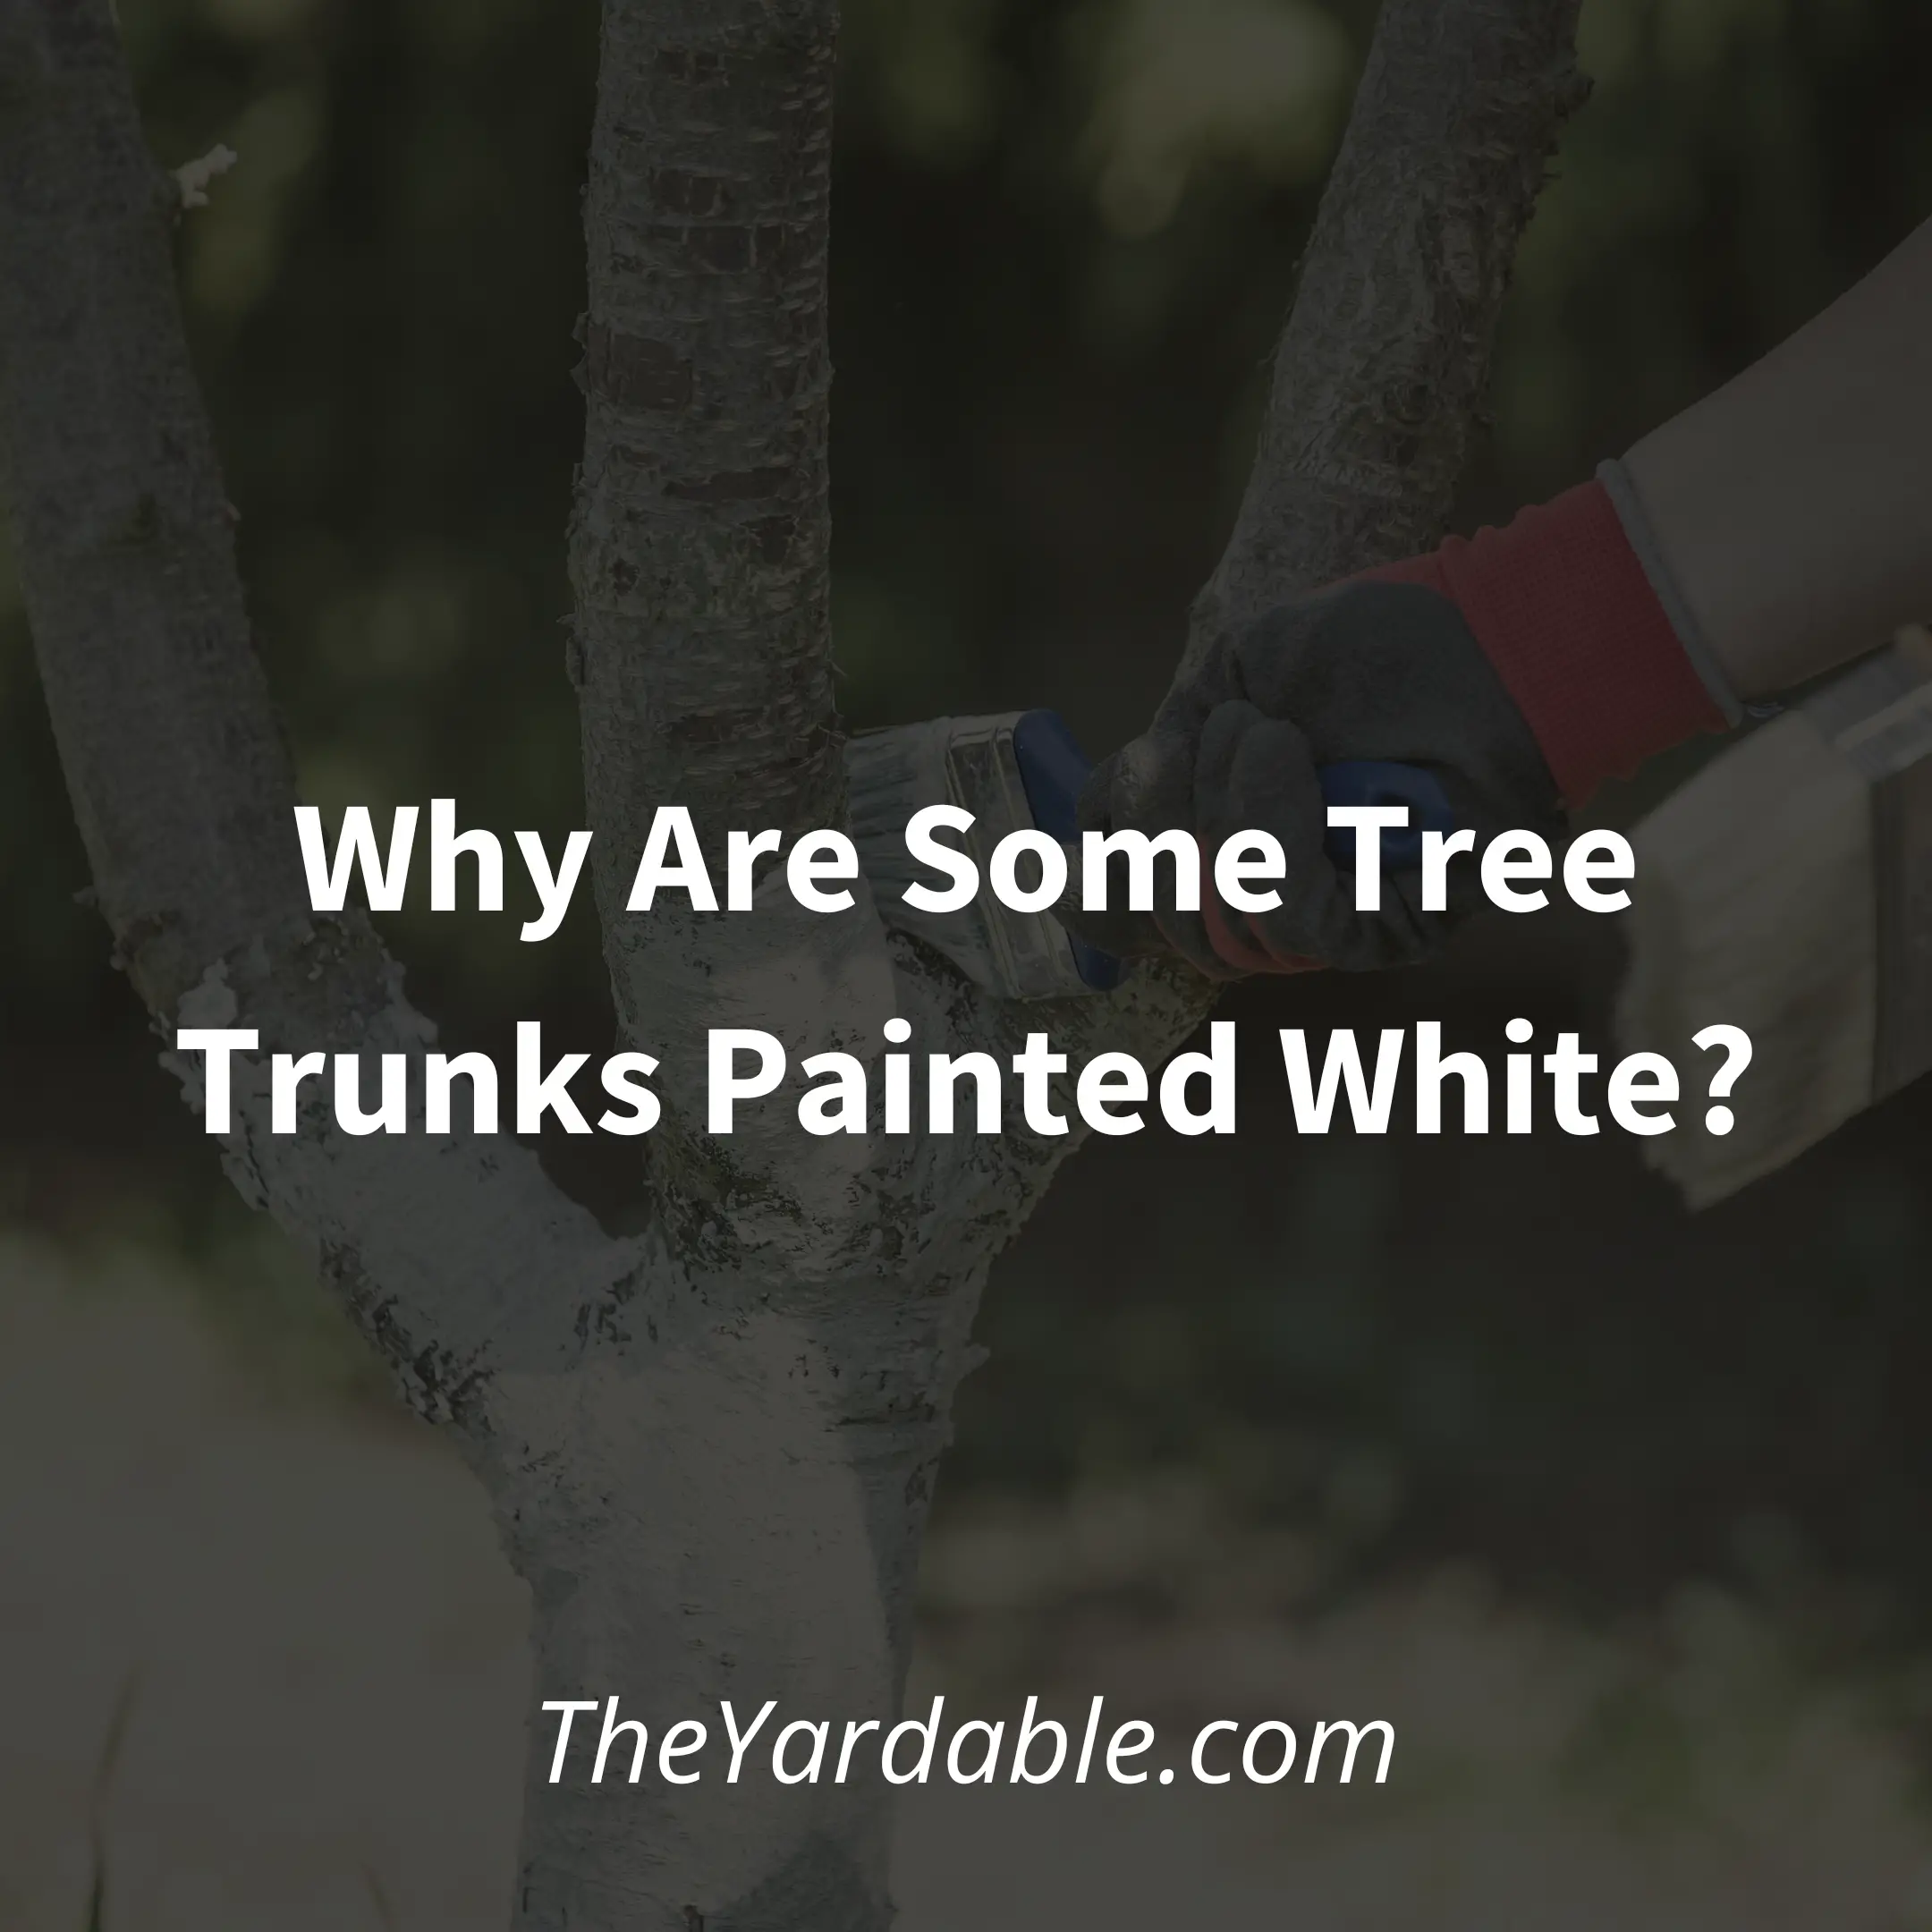 Why Are Tree Trunks Painted White? – Reasons and Benefits